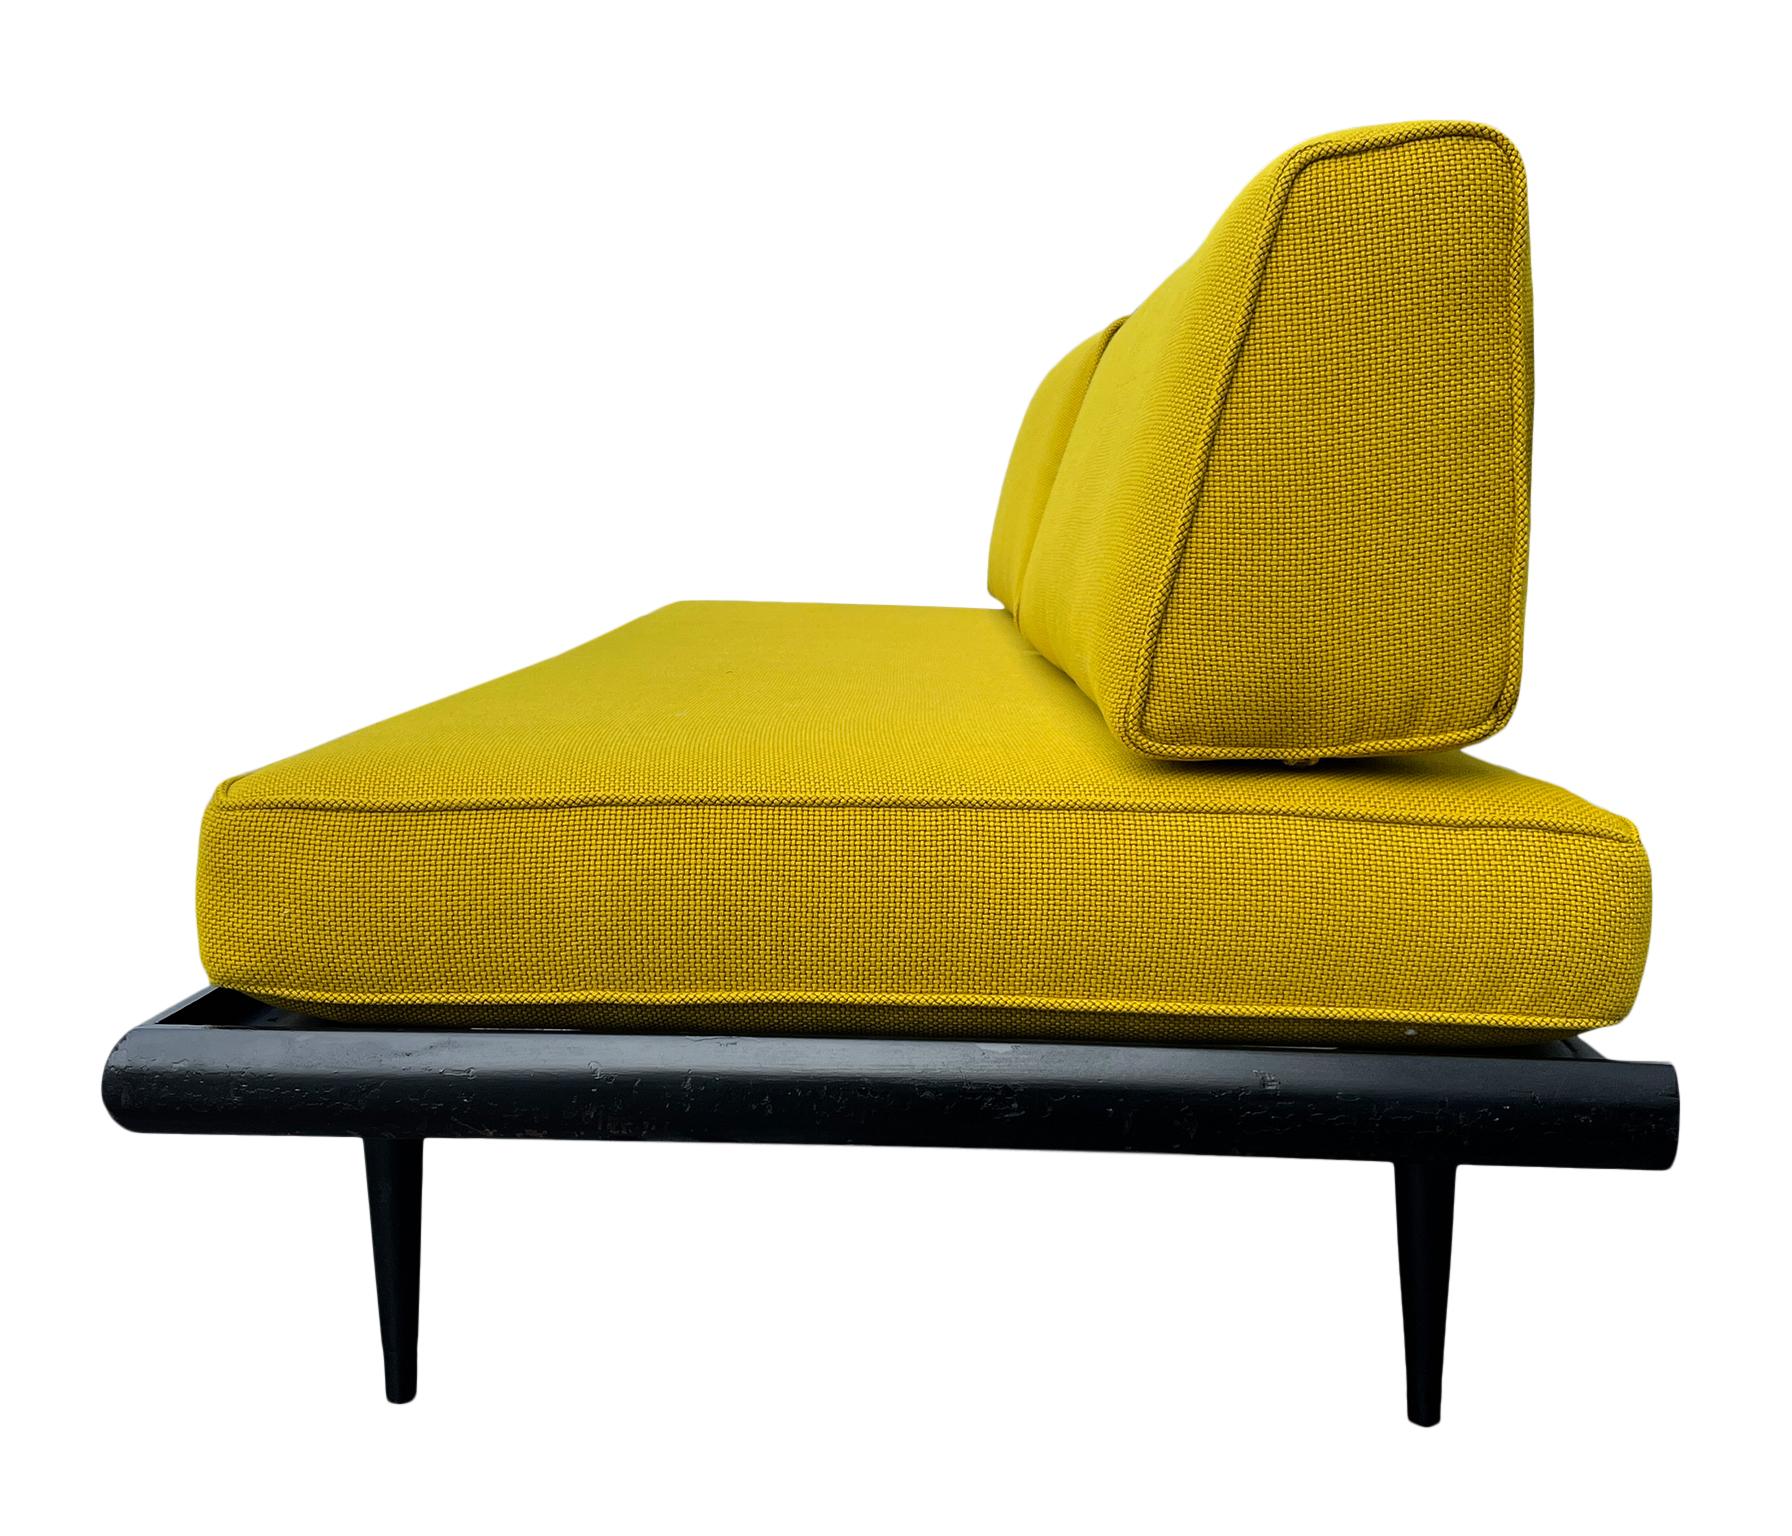 mid century modern daybeds